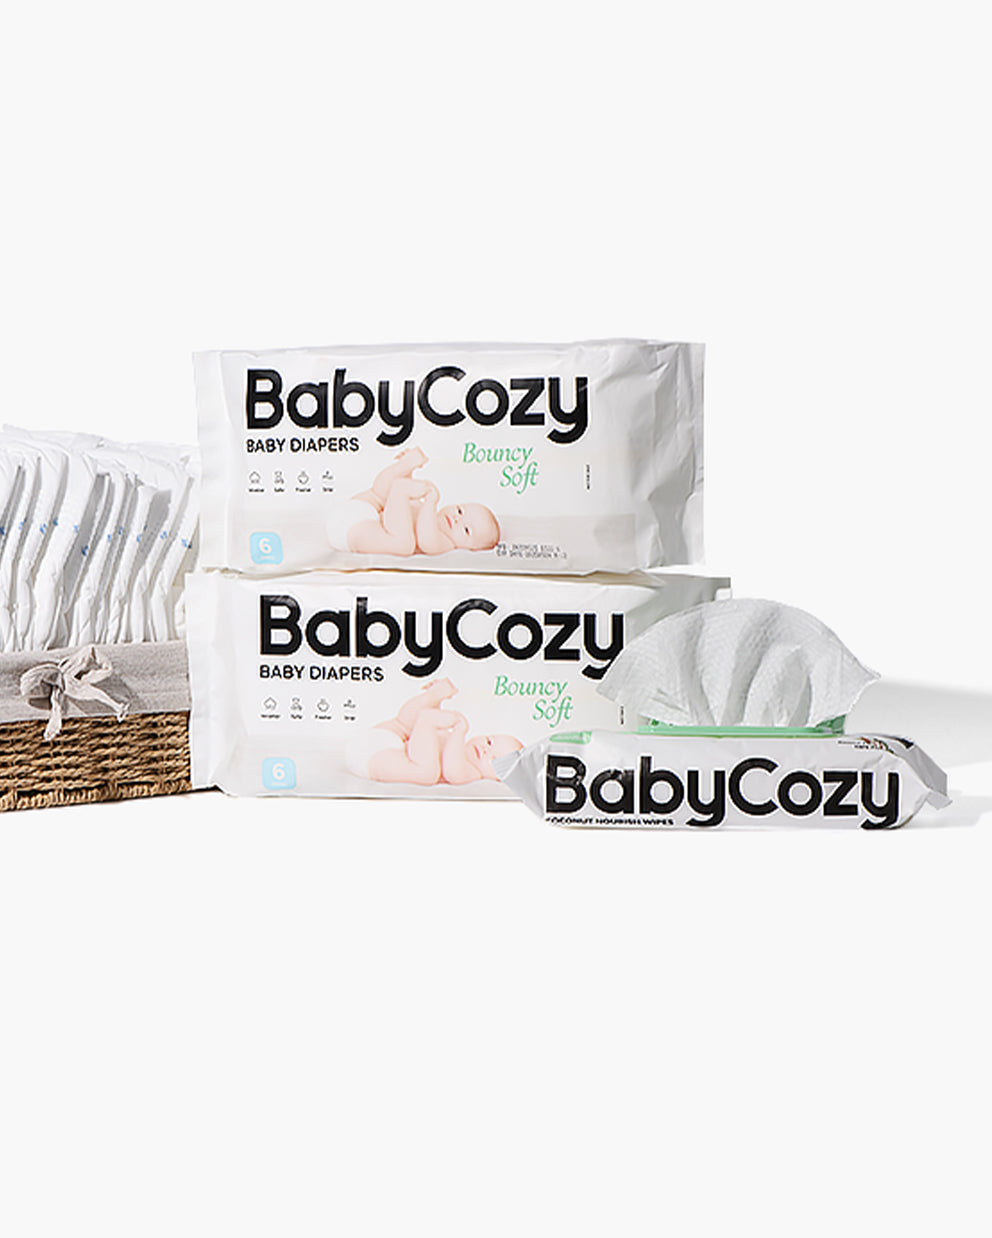 MOMCOZY DIAPERS COMPLETE COLLECTIOL.